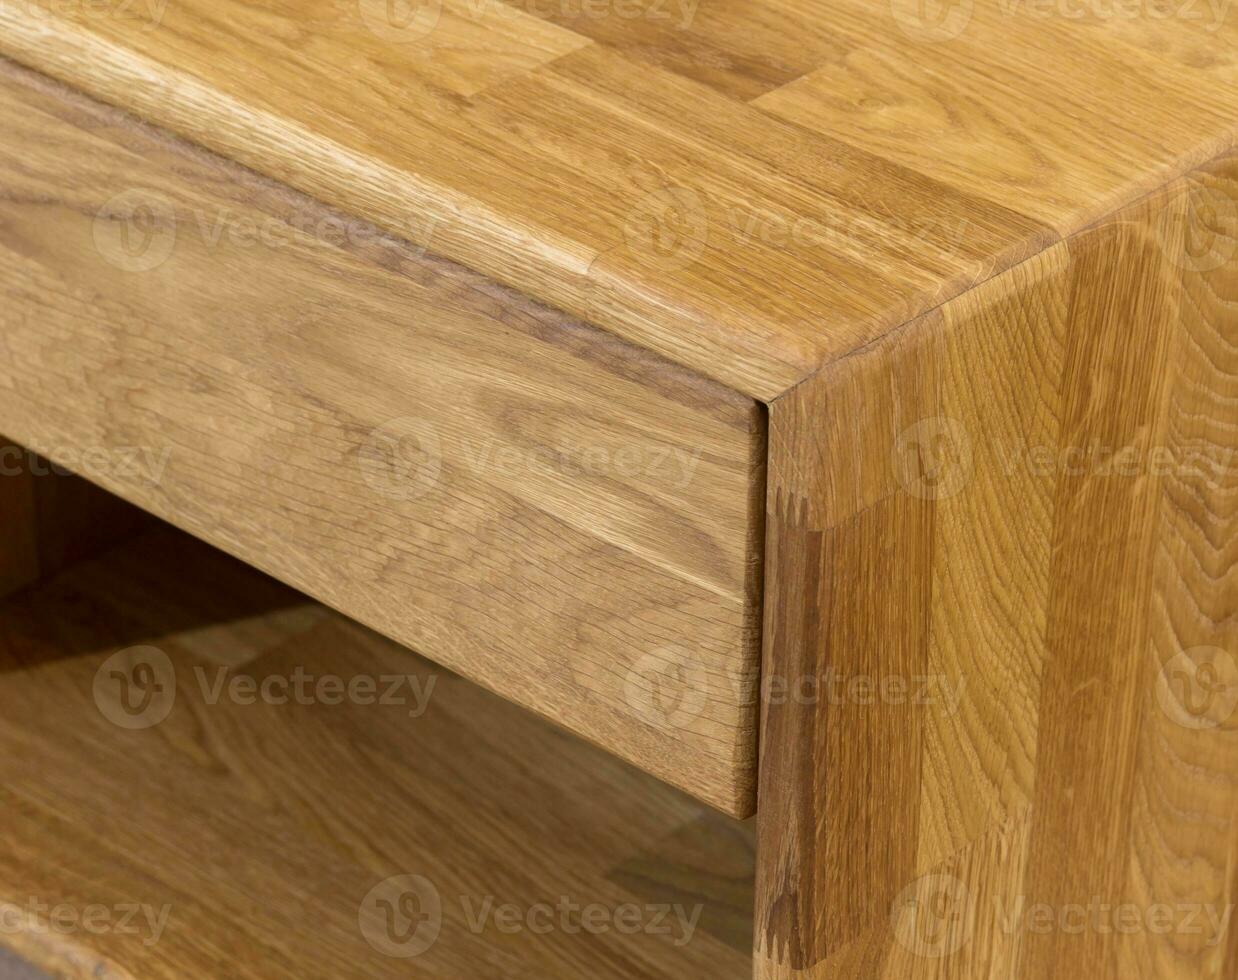 Wooden drawer of a nightstand close view photo, wooden eco furniture elements background. Solid wood furniture details photo